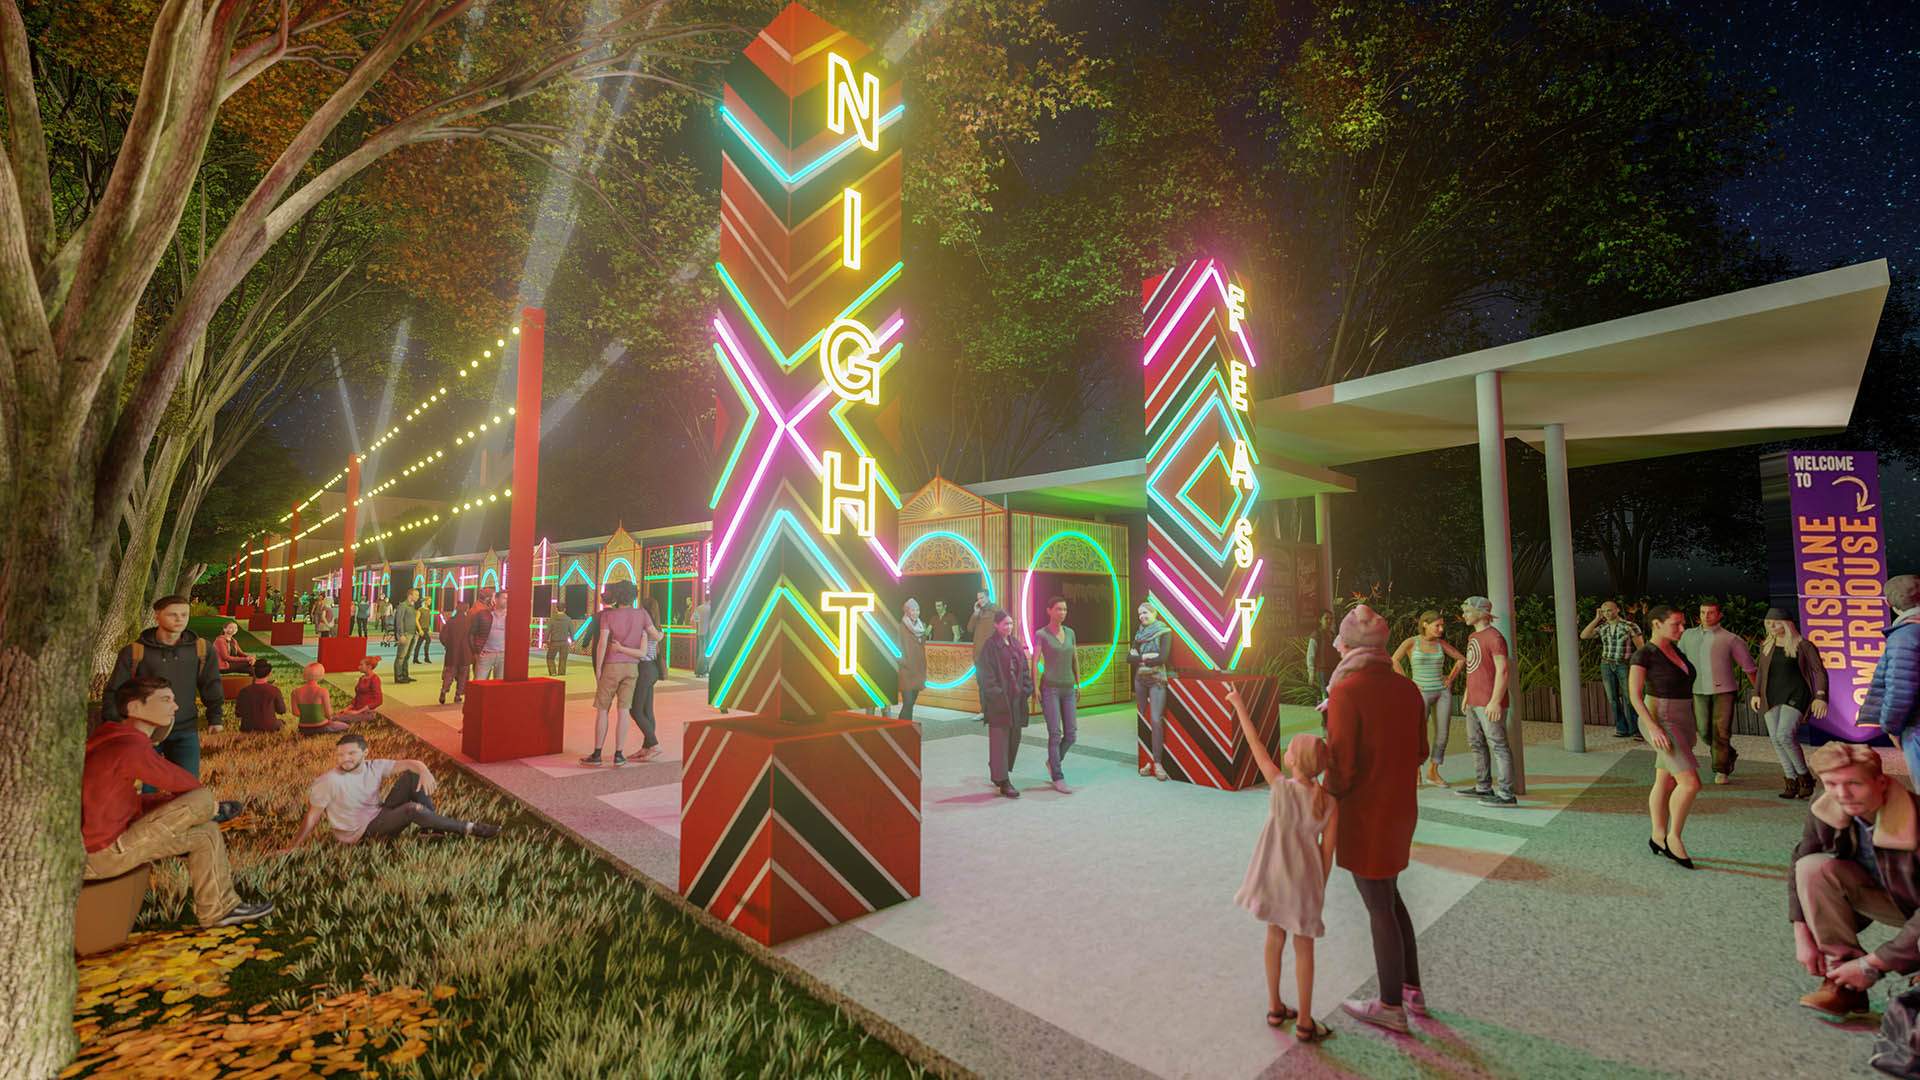 Brisbane Powerhouse's Neon-Lit Night Feast Food Market Has Unveiled Its March Culinary Headliners